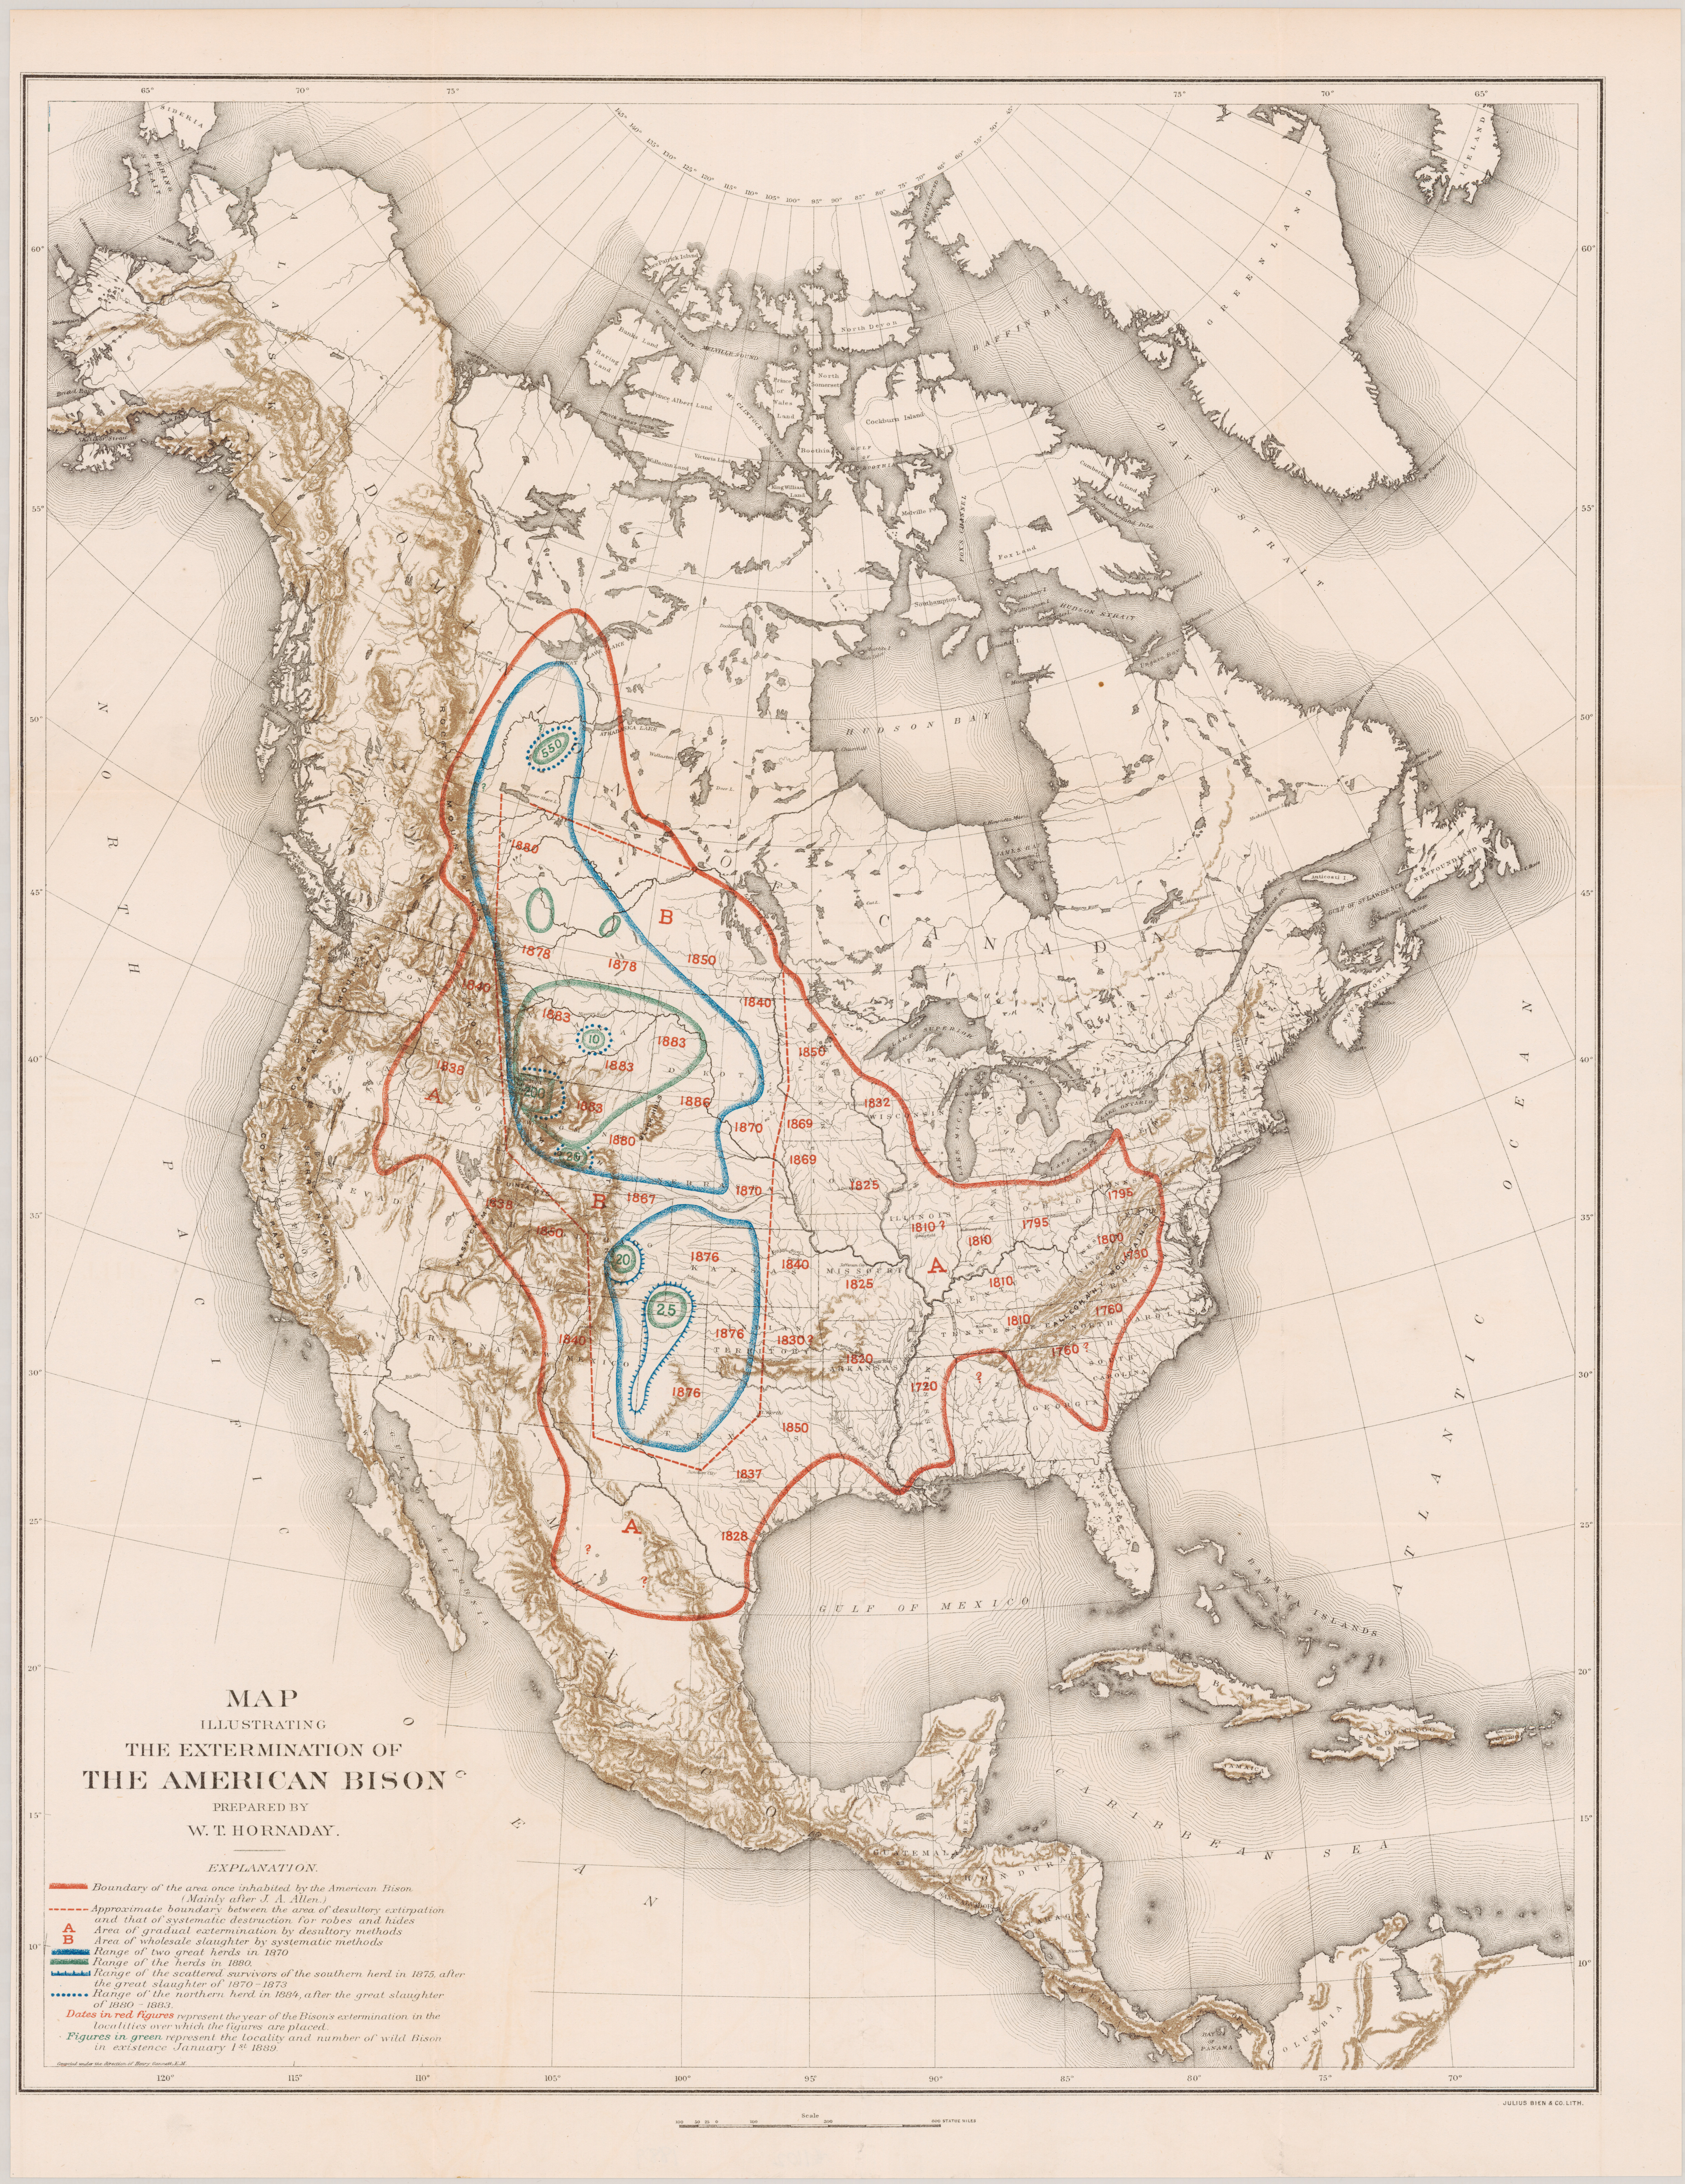 A photo of an old map of North America showing outlines of different stages of buffalo distribution.